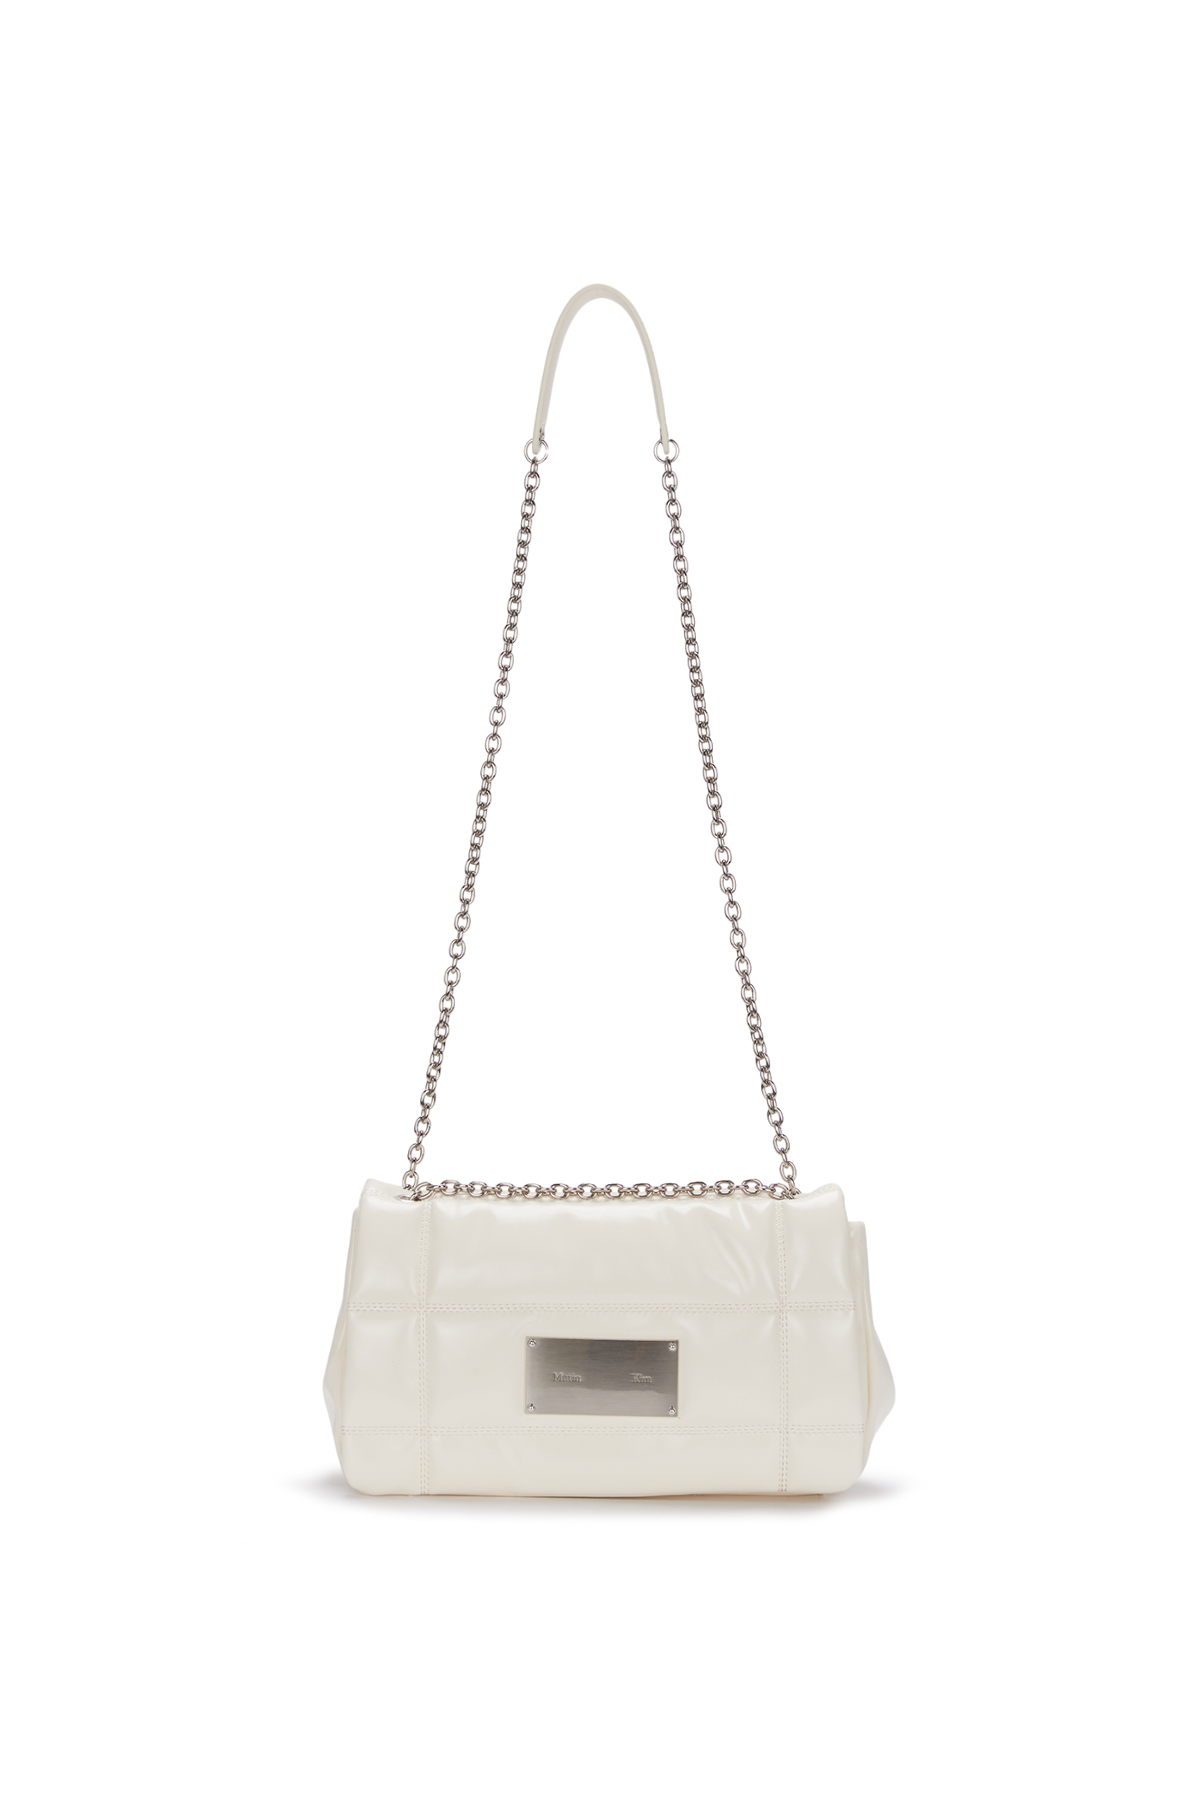 CLASSIC CHAIN QUILTING BAG IN IVORY